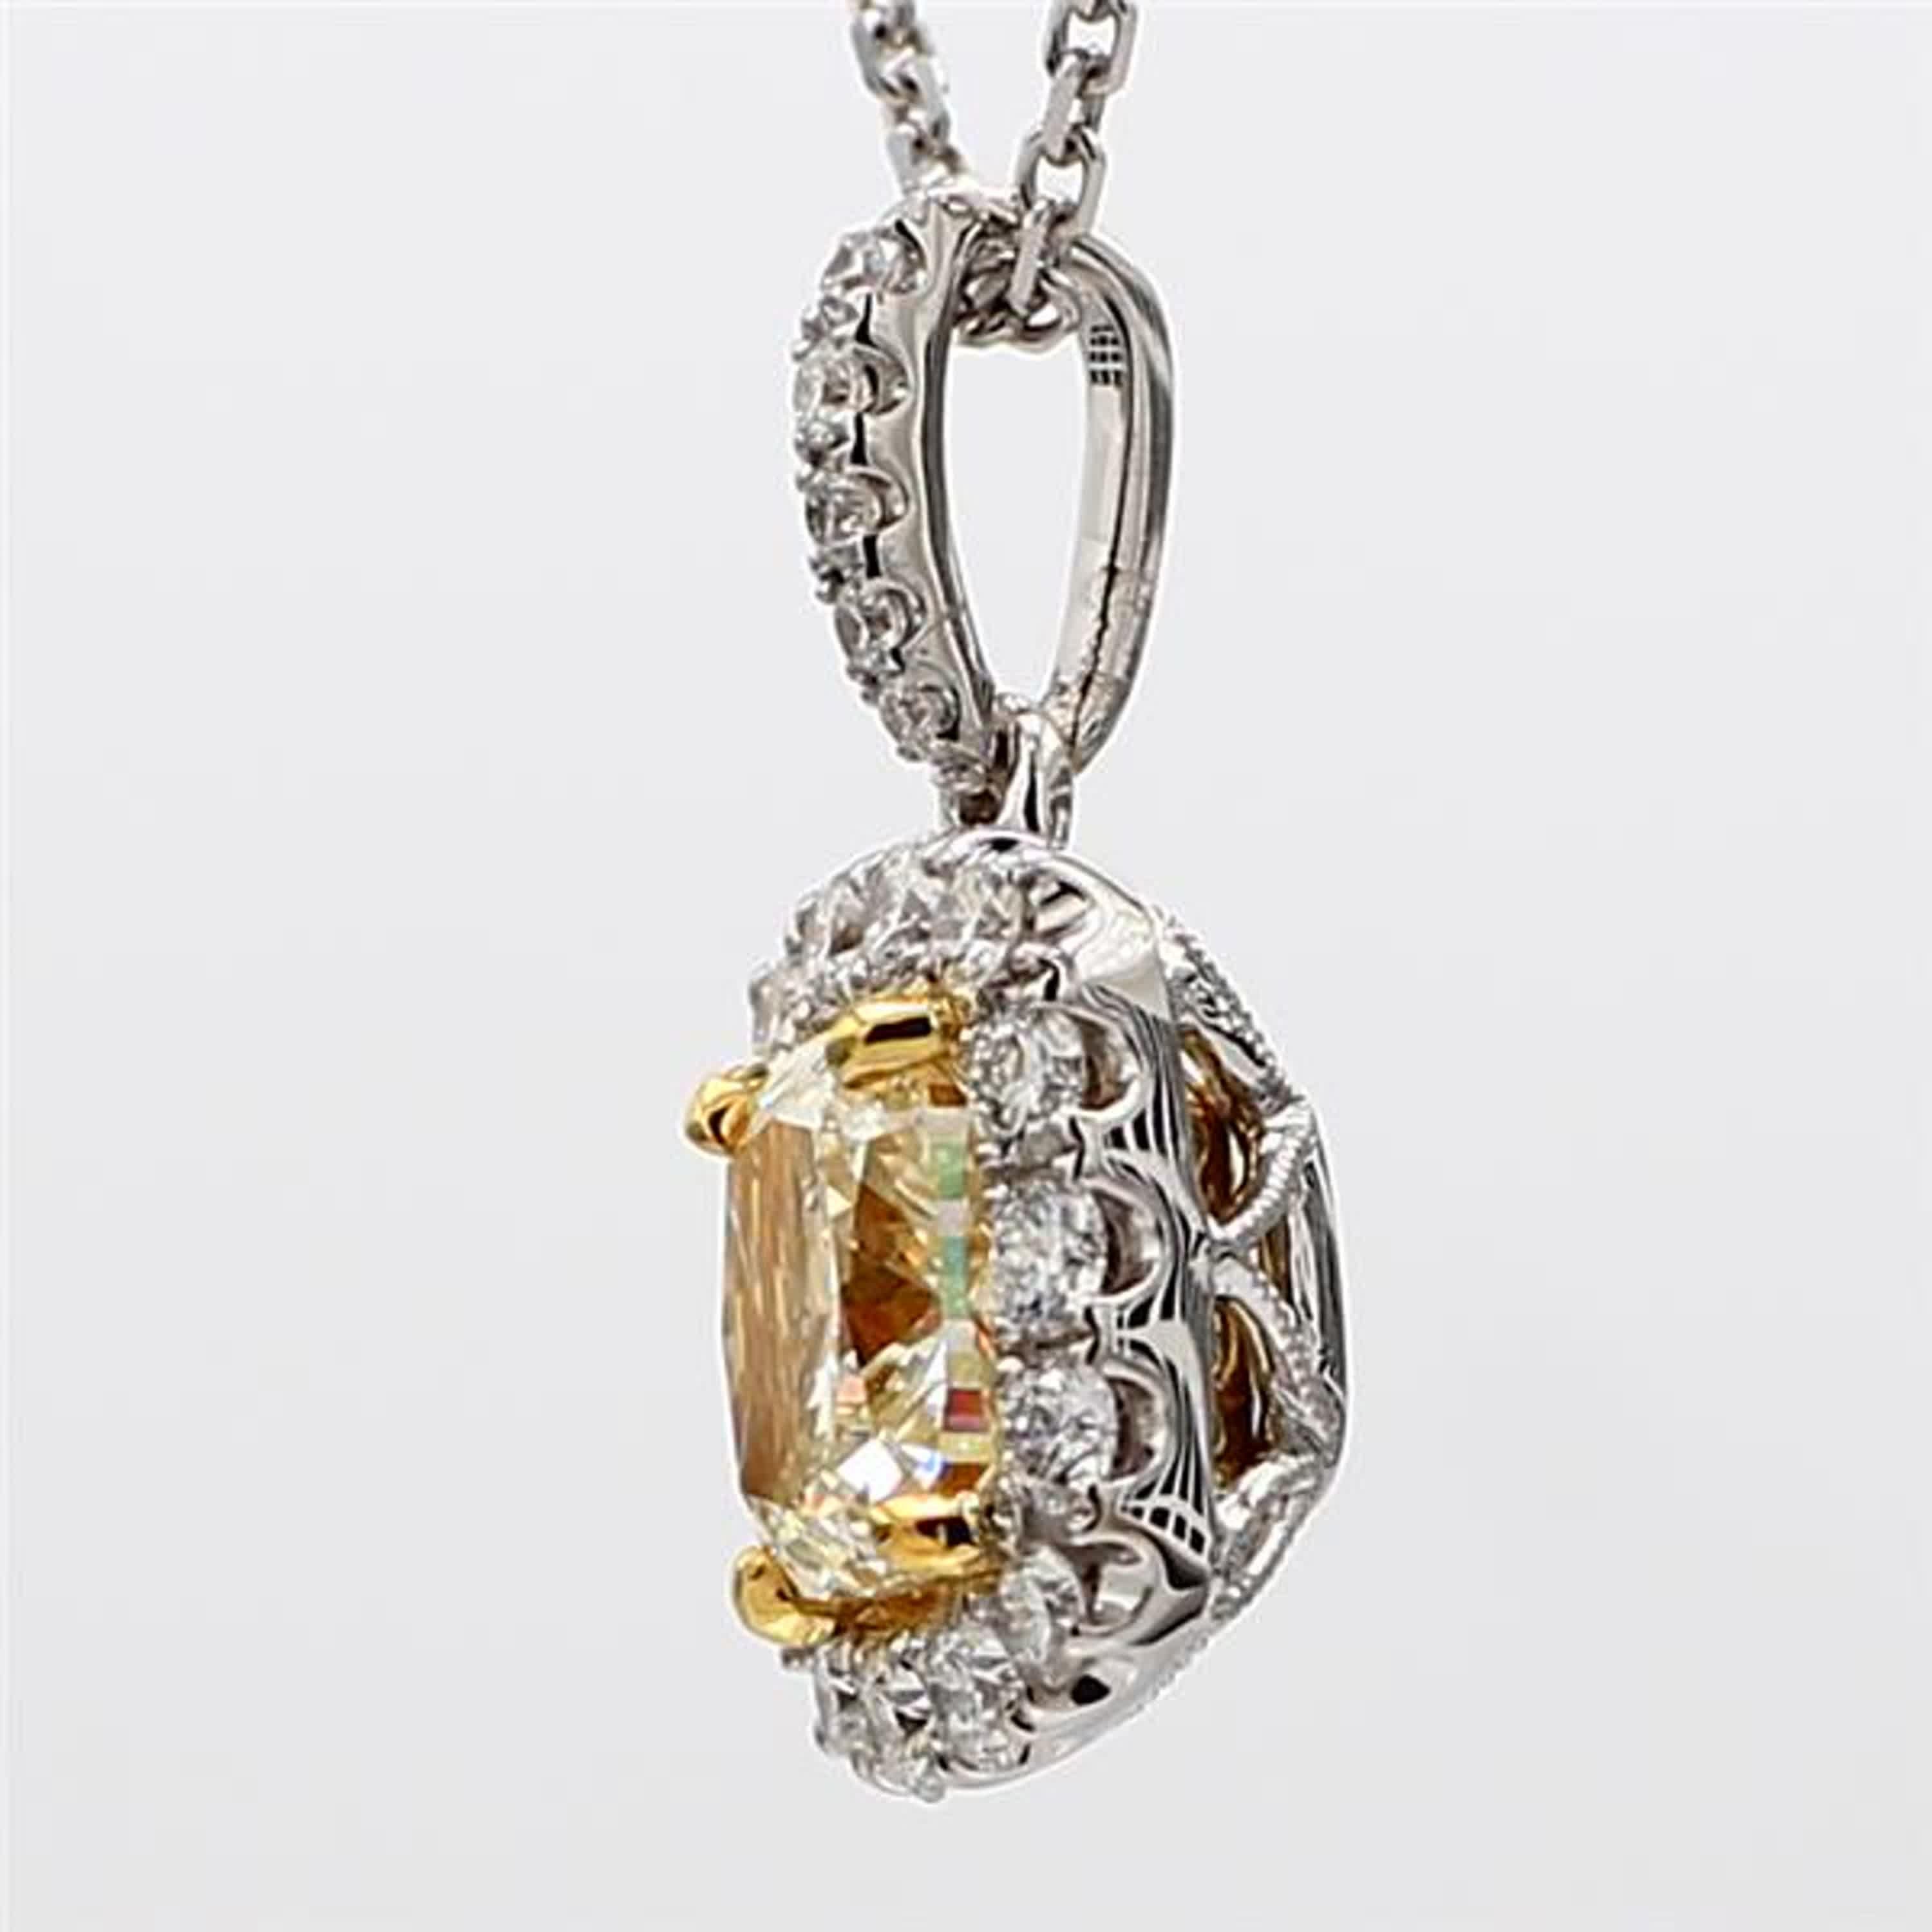 Contemporary GIA Certified Natural Yellow Cushion and White Diamond 1.35ct TW Gold Pendant